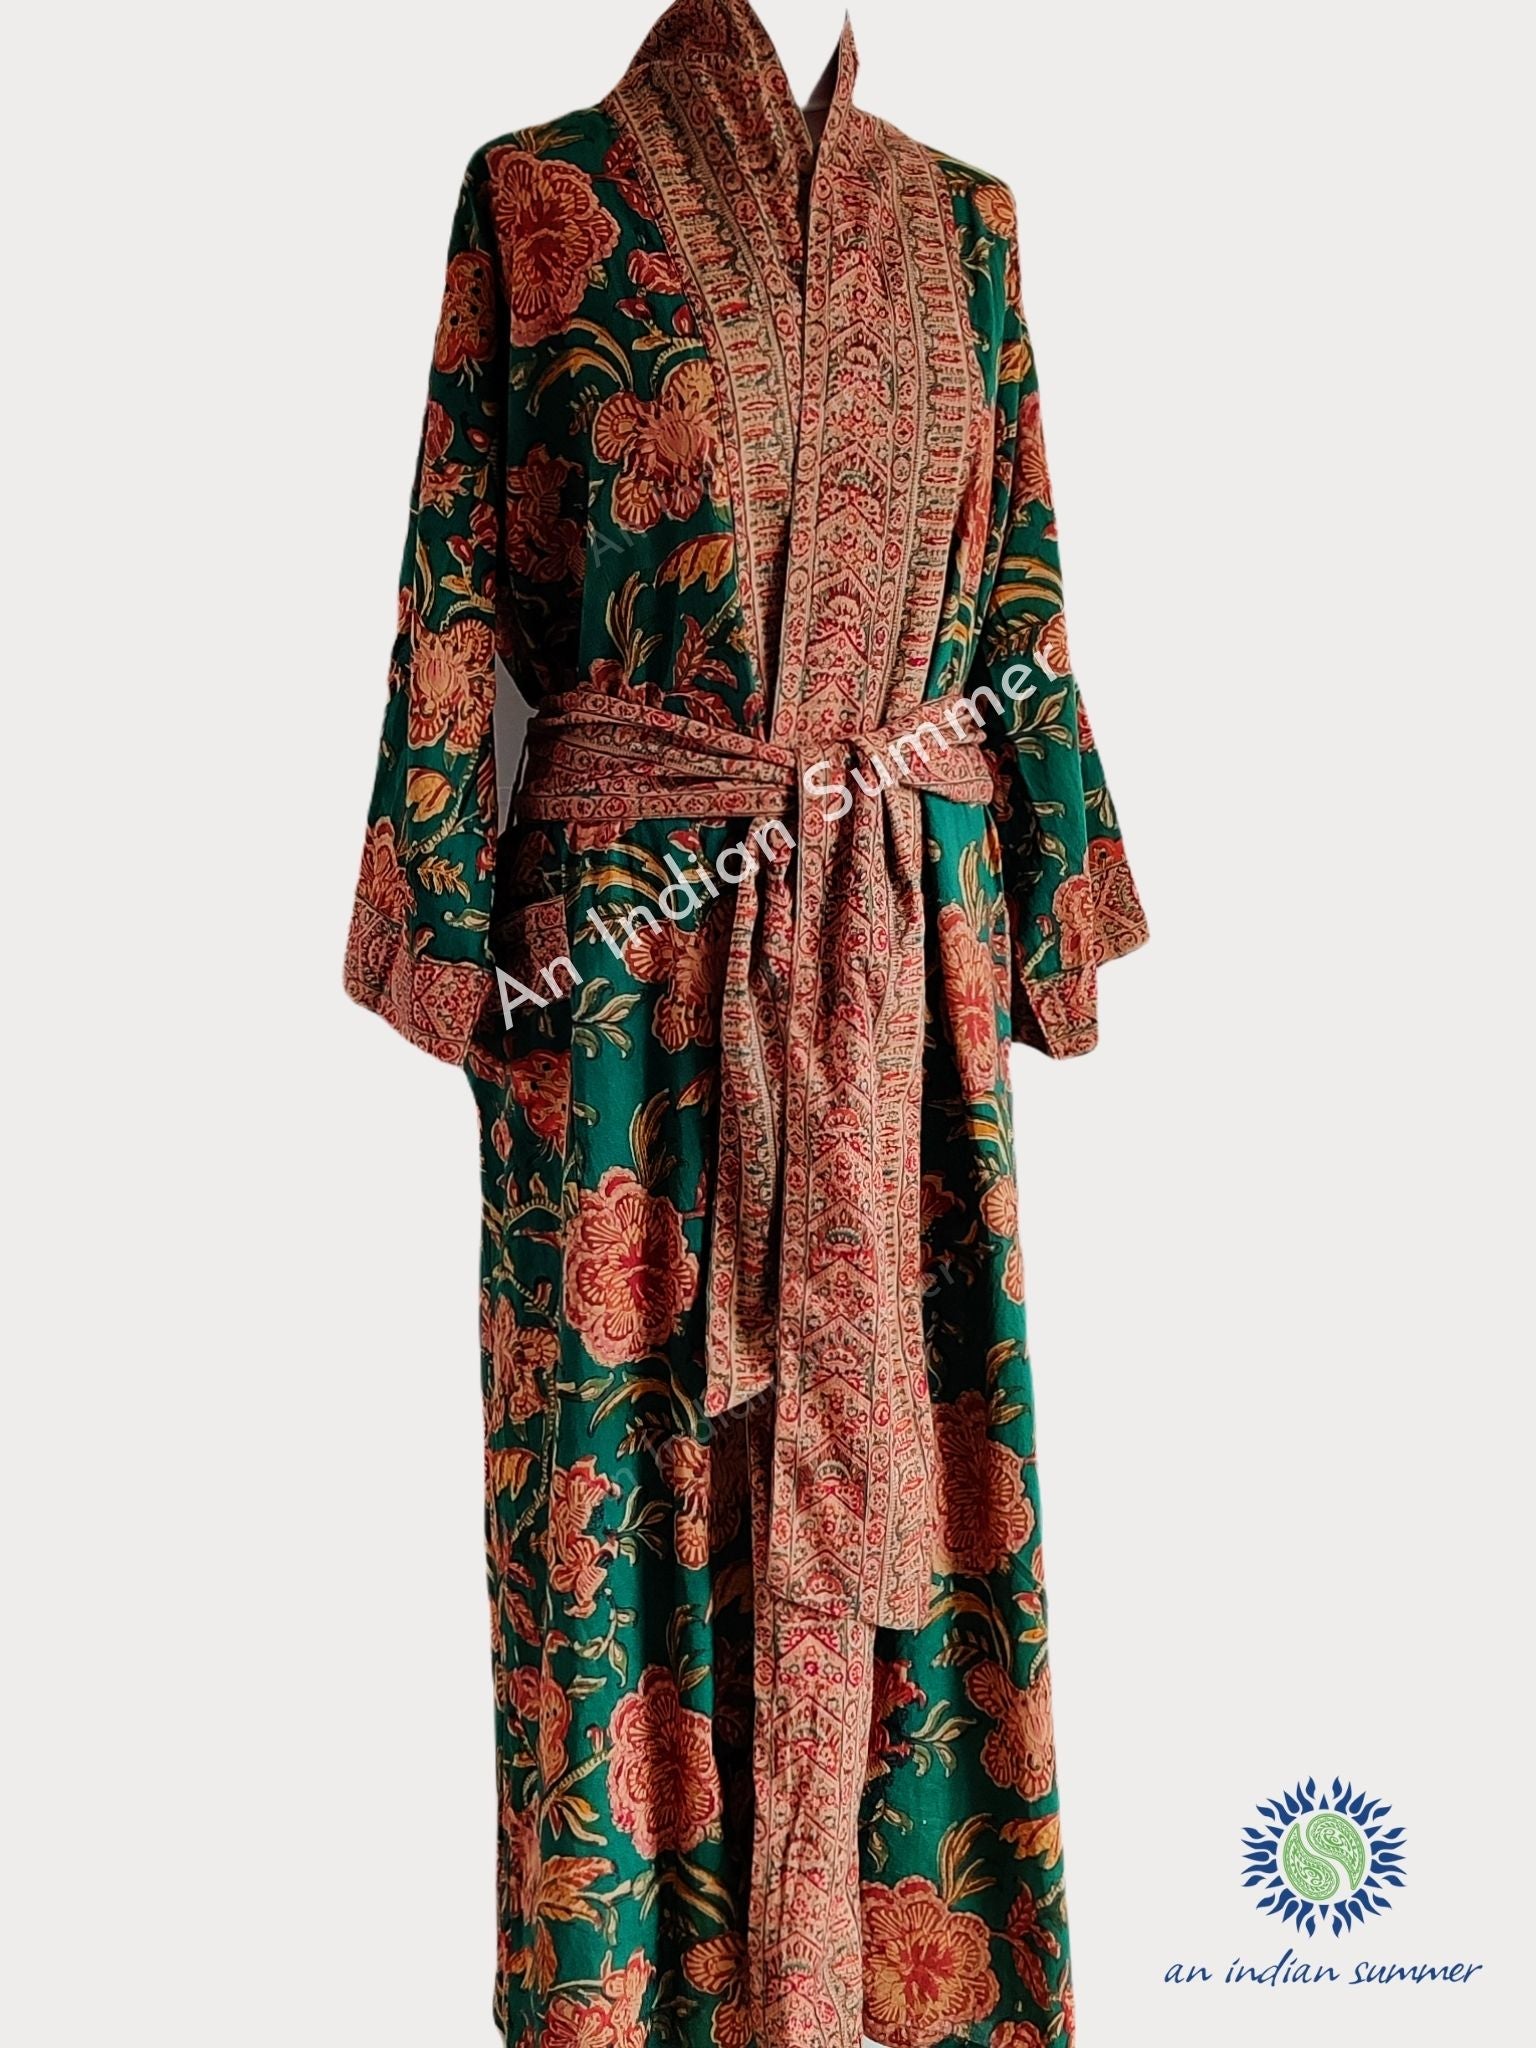 Long Kimono Robe | Tree of Life | Green | Wood Block Print | Hand Block Printed | Cotton | An Indian Summer | Seasonless Timeless Sustainable Ethical Authentic Artisan Conscious Clothing Lifestyle Brand